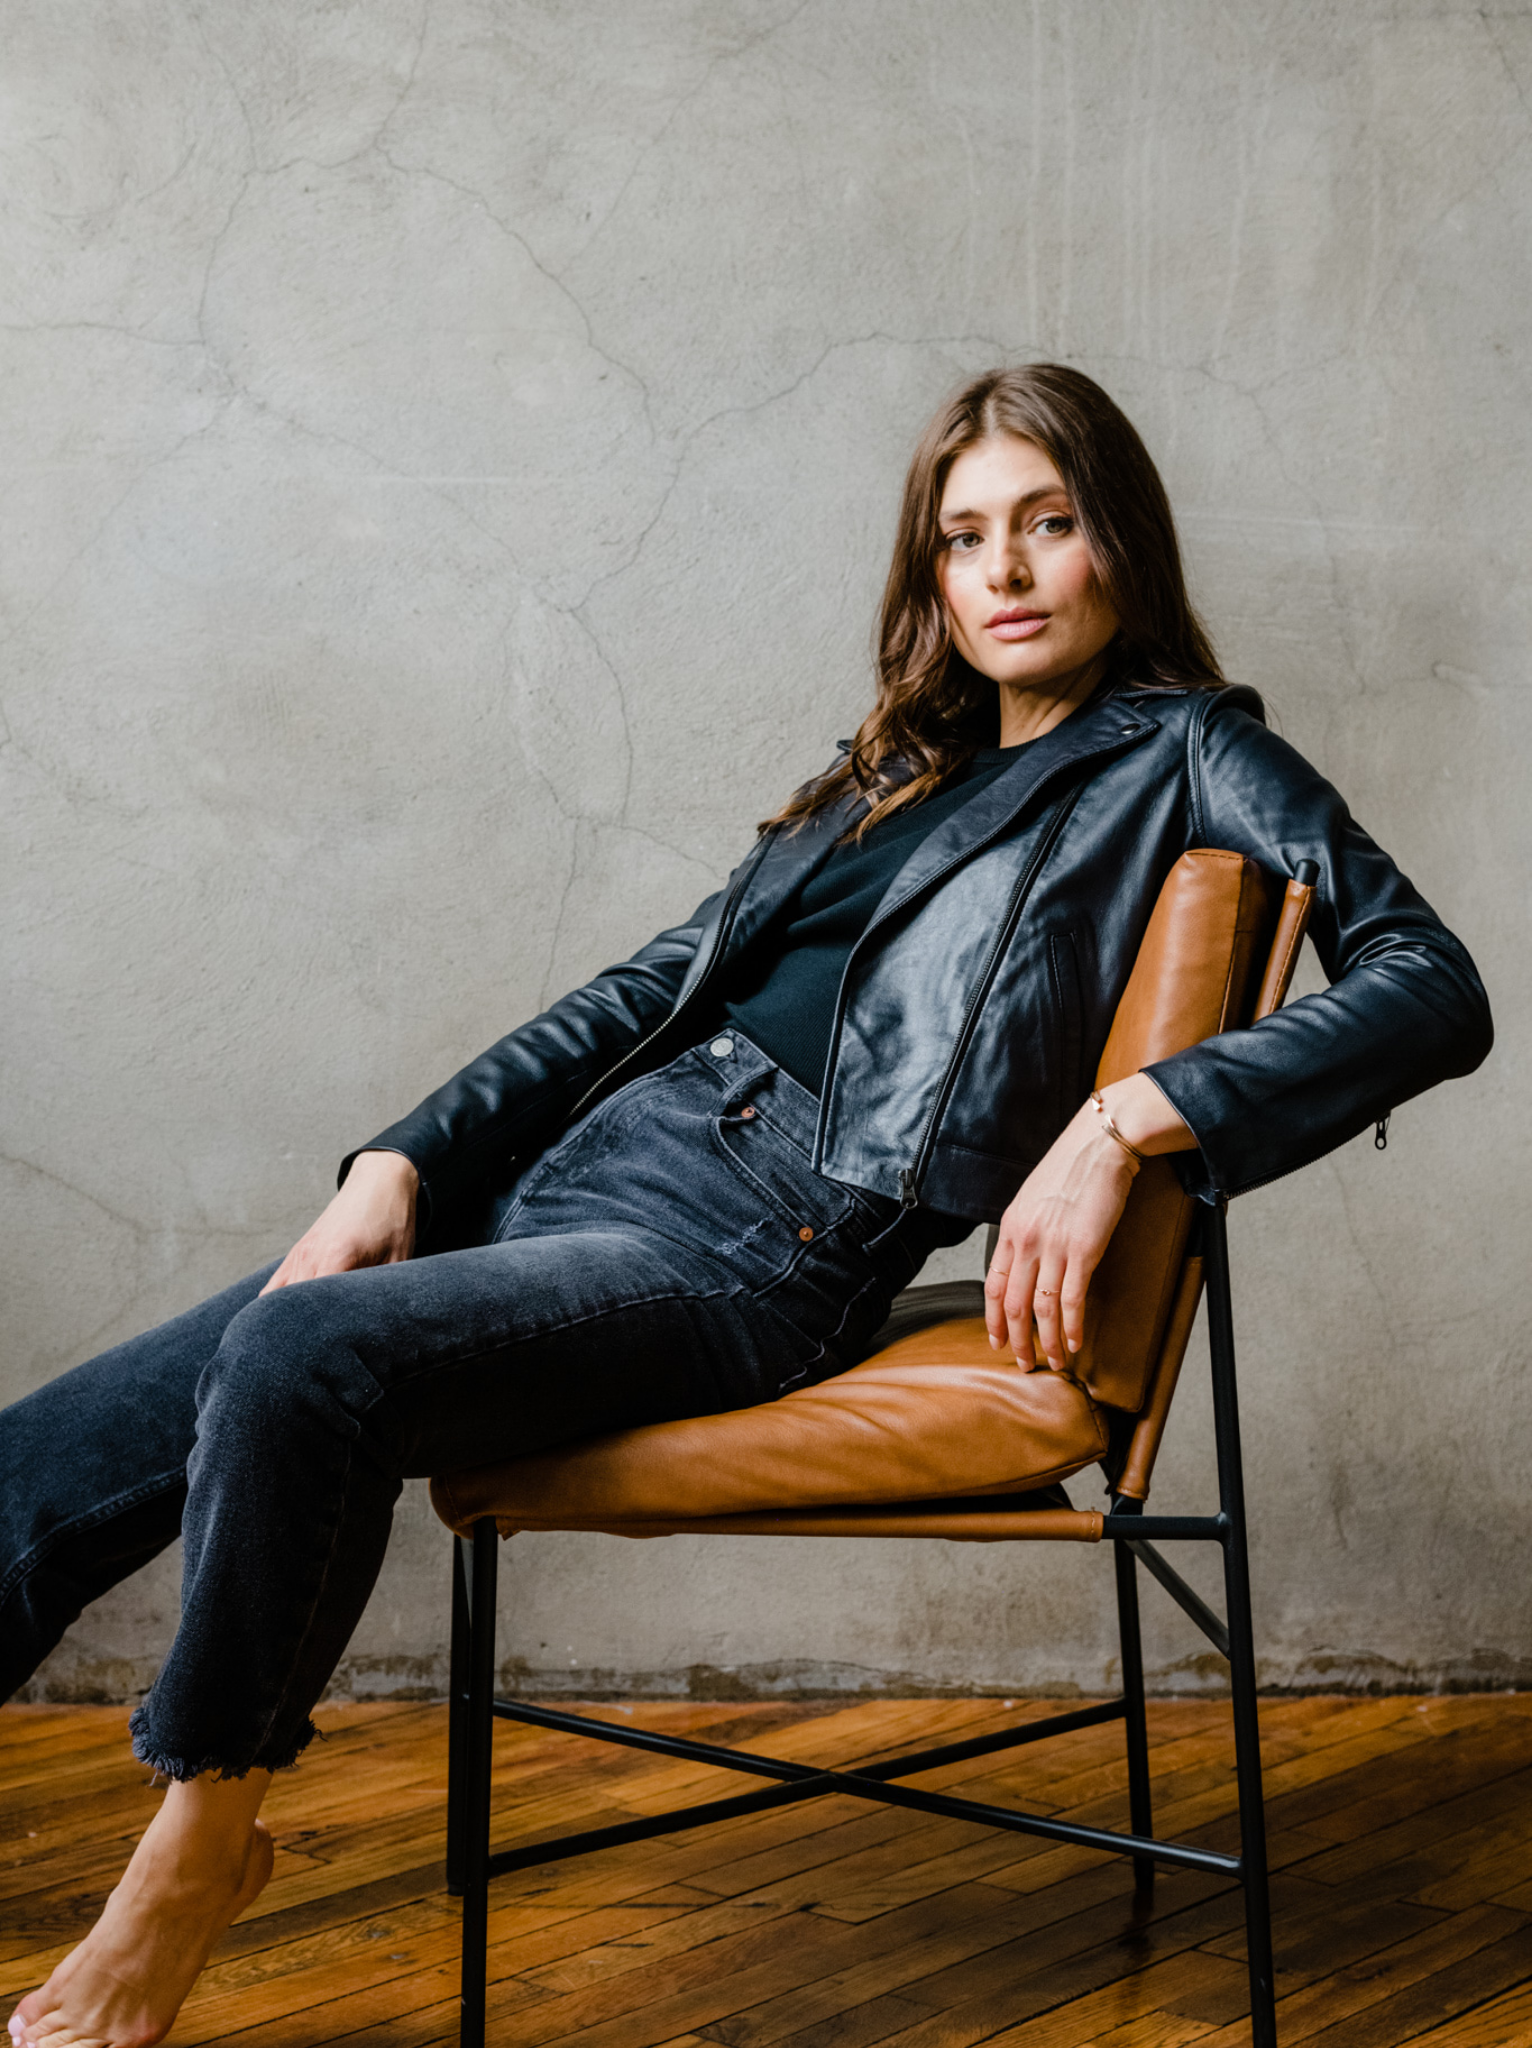 Woman sitting casually in a chair wearing a black leather jacket and jeans.